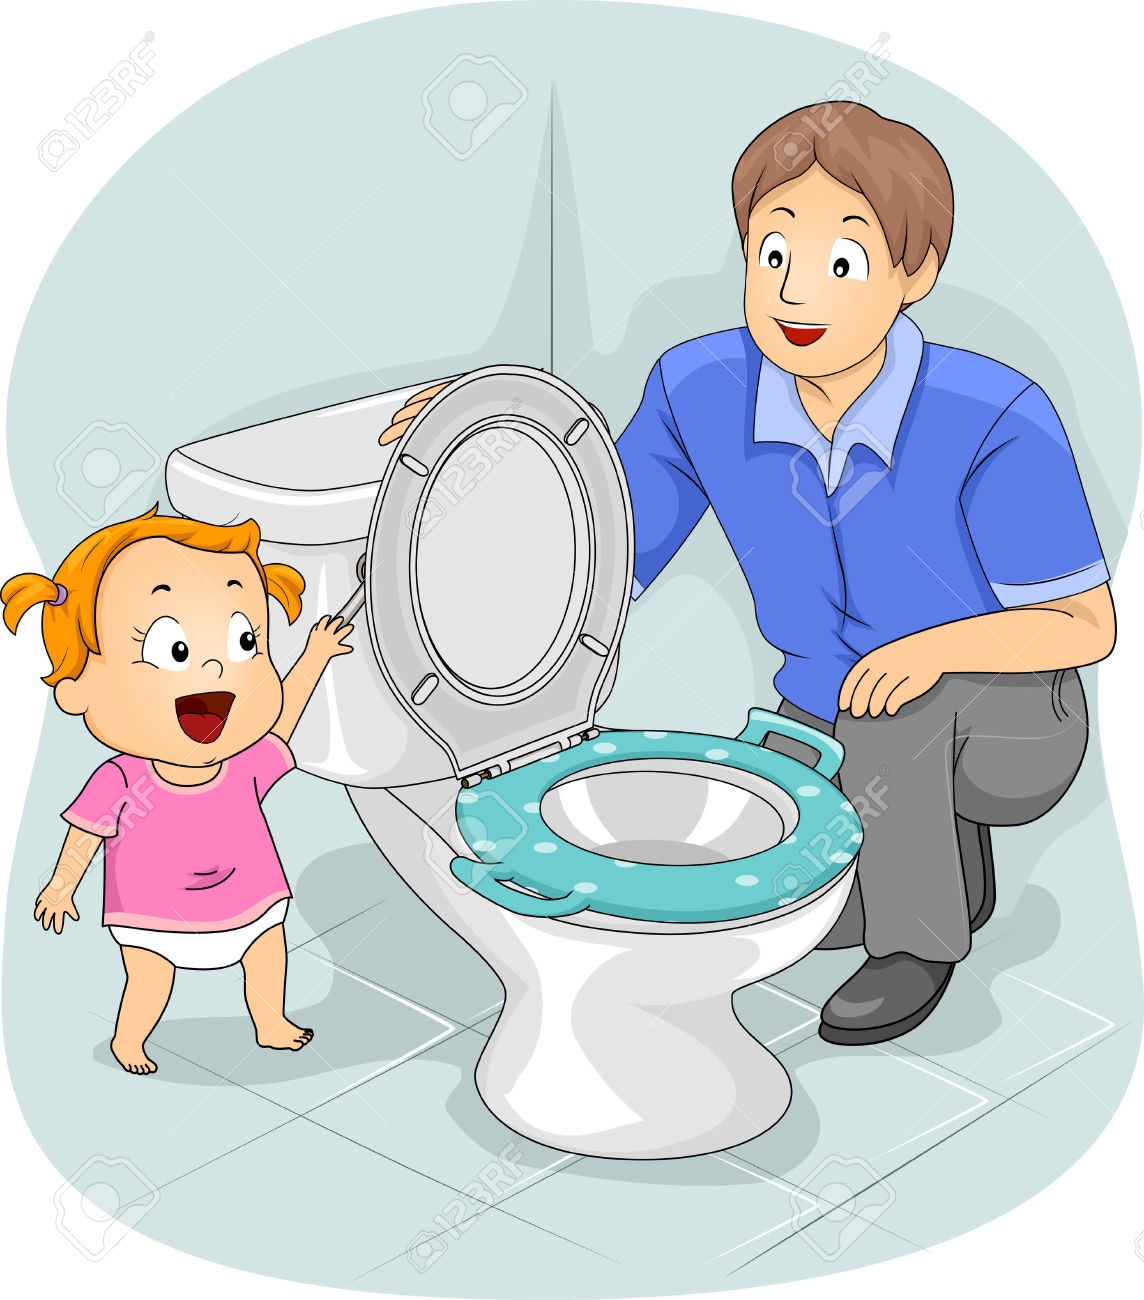 List 95 Wallpaper Cartoon Pictures Of A Toilet Latest